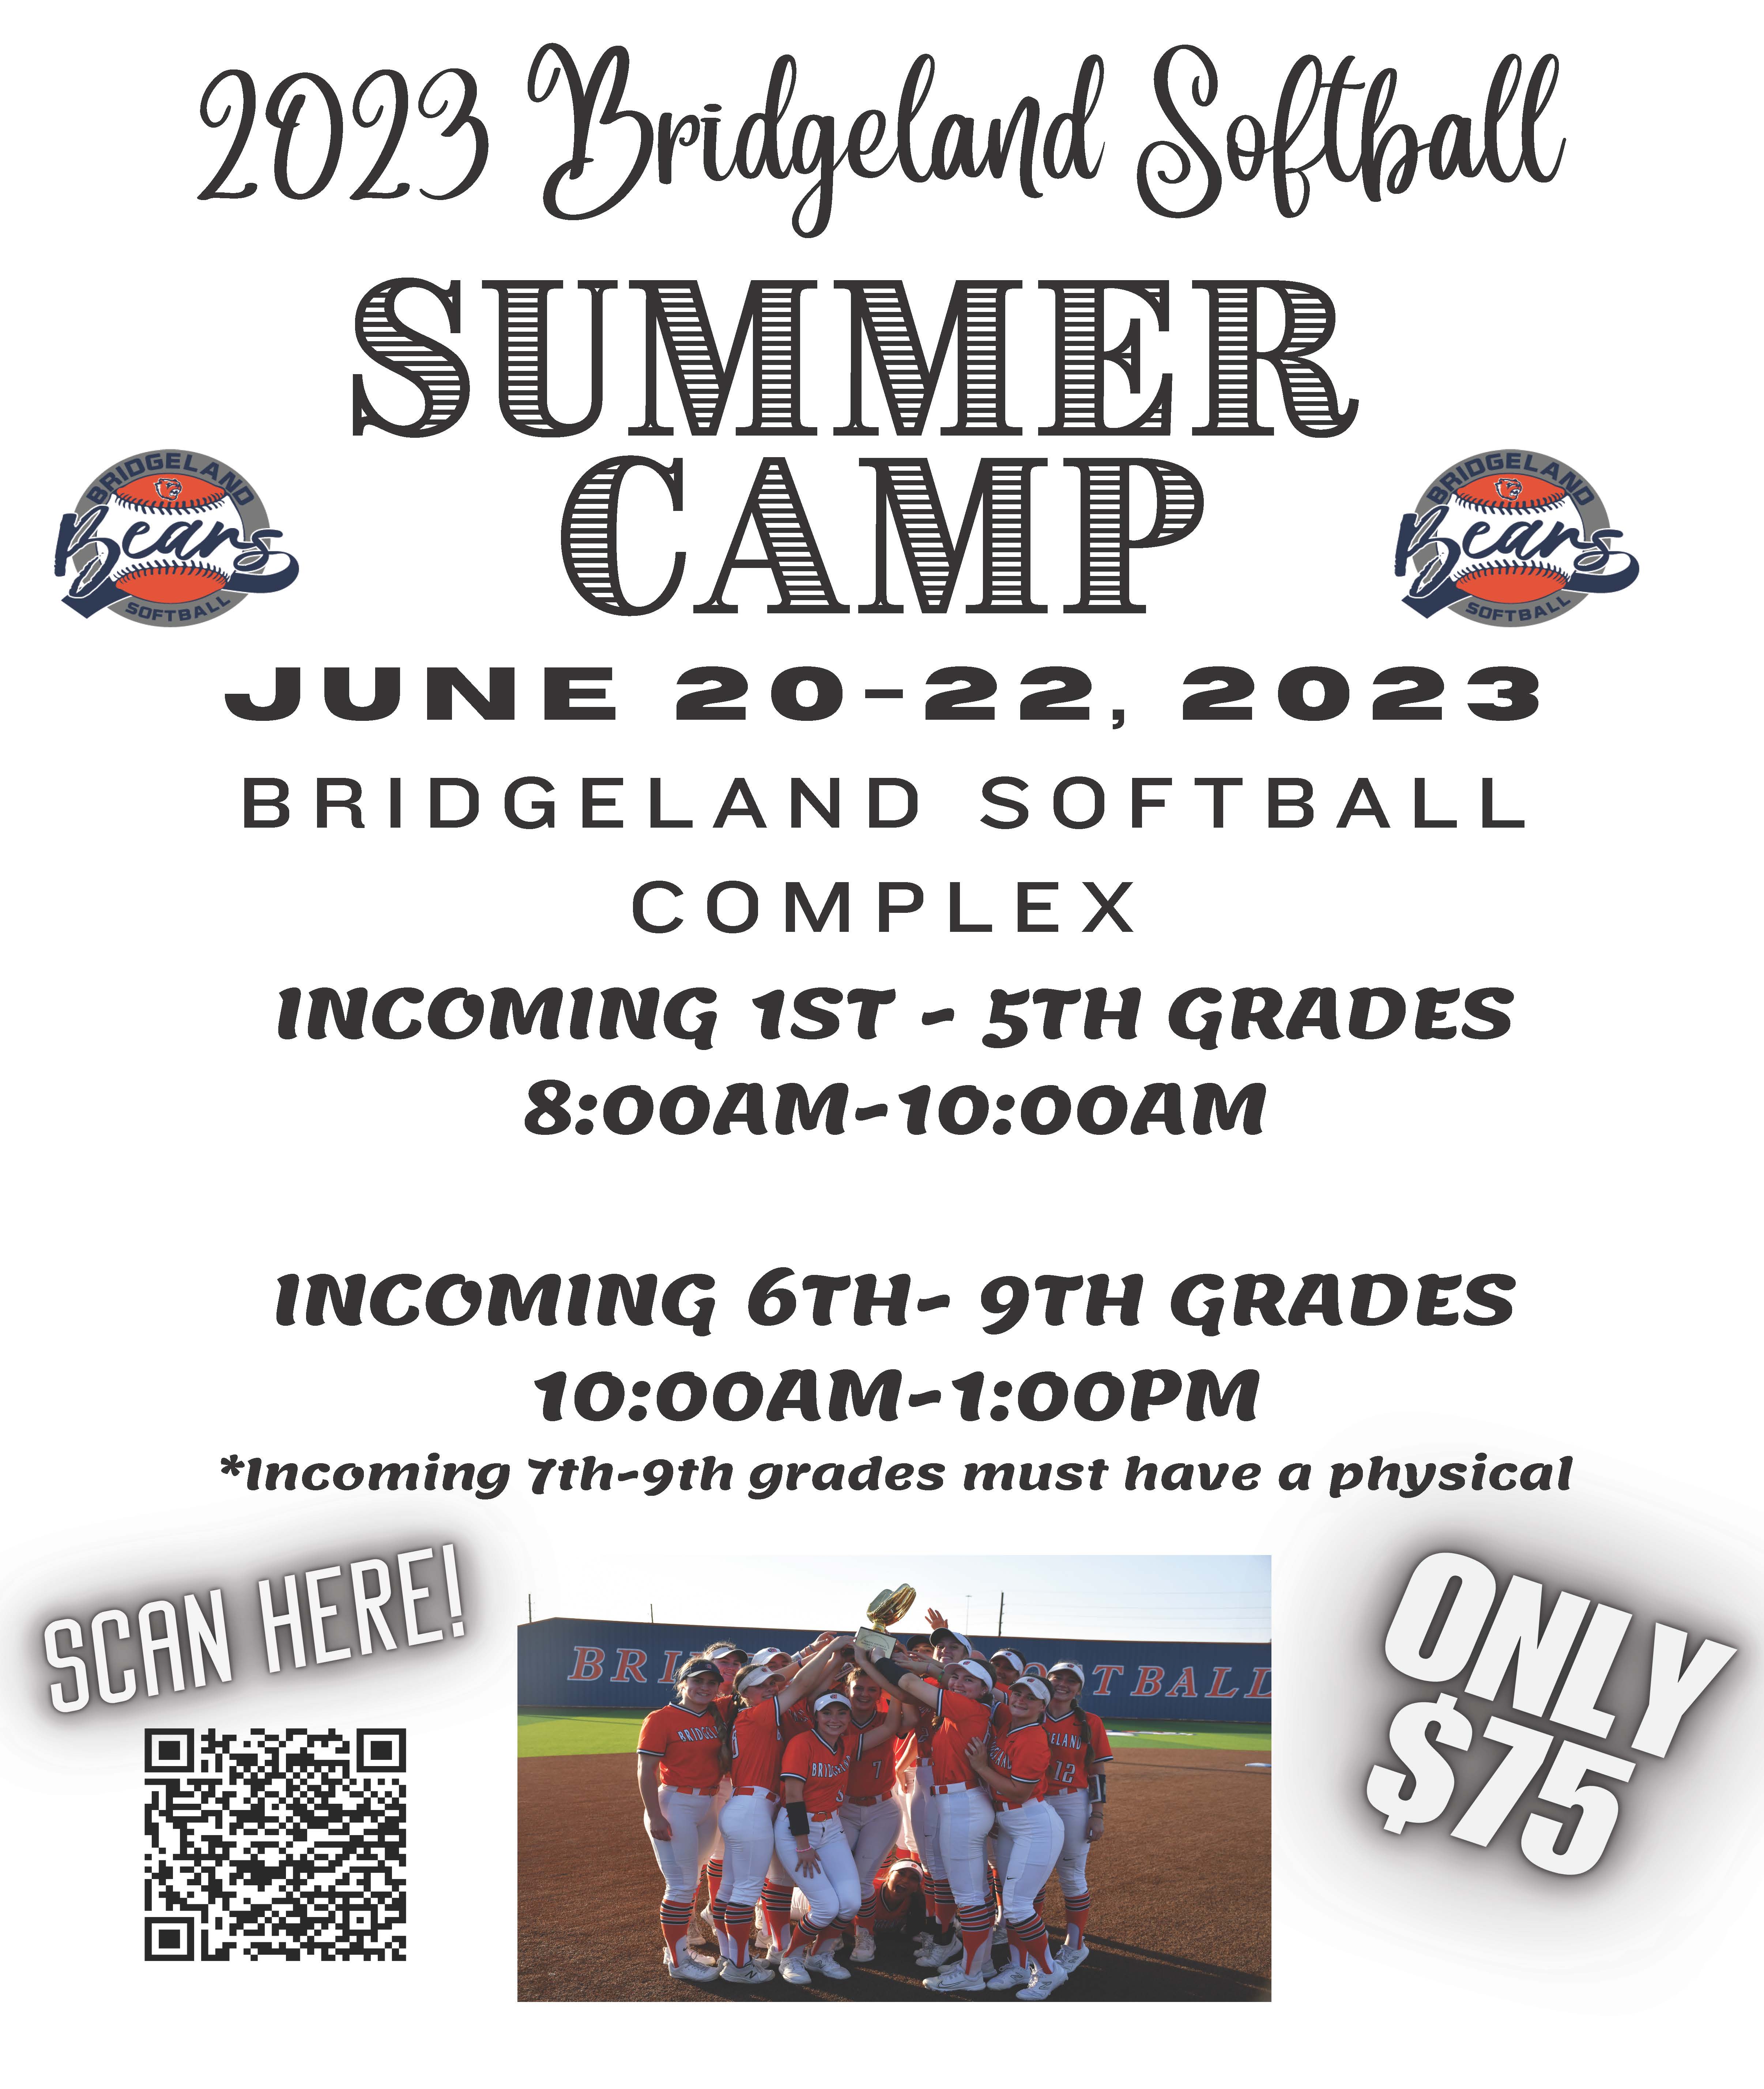 2023 Bridgeland Softball Summer Camp  June 20-22, 2023 Bridgeland Softball Complex Only $75 8 a.m.-1 p.m. - Incoming 1st-5th graders  10 a.m.-1 p.m. - Incoming 6th-9th graders (Incoming 7th-9th graders must have a physical